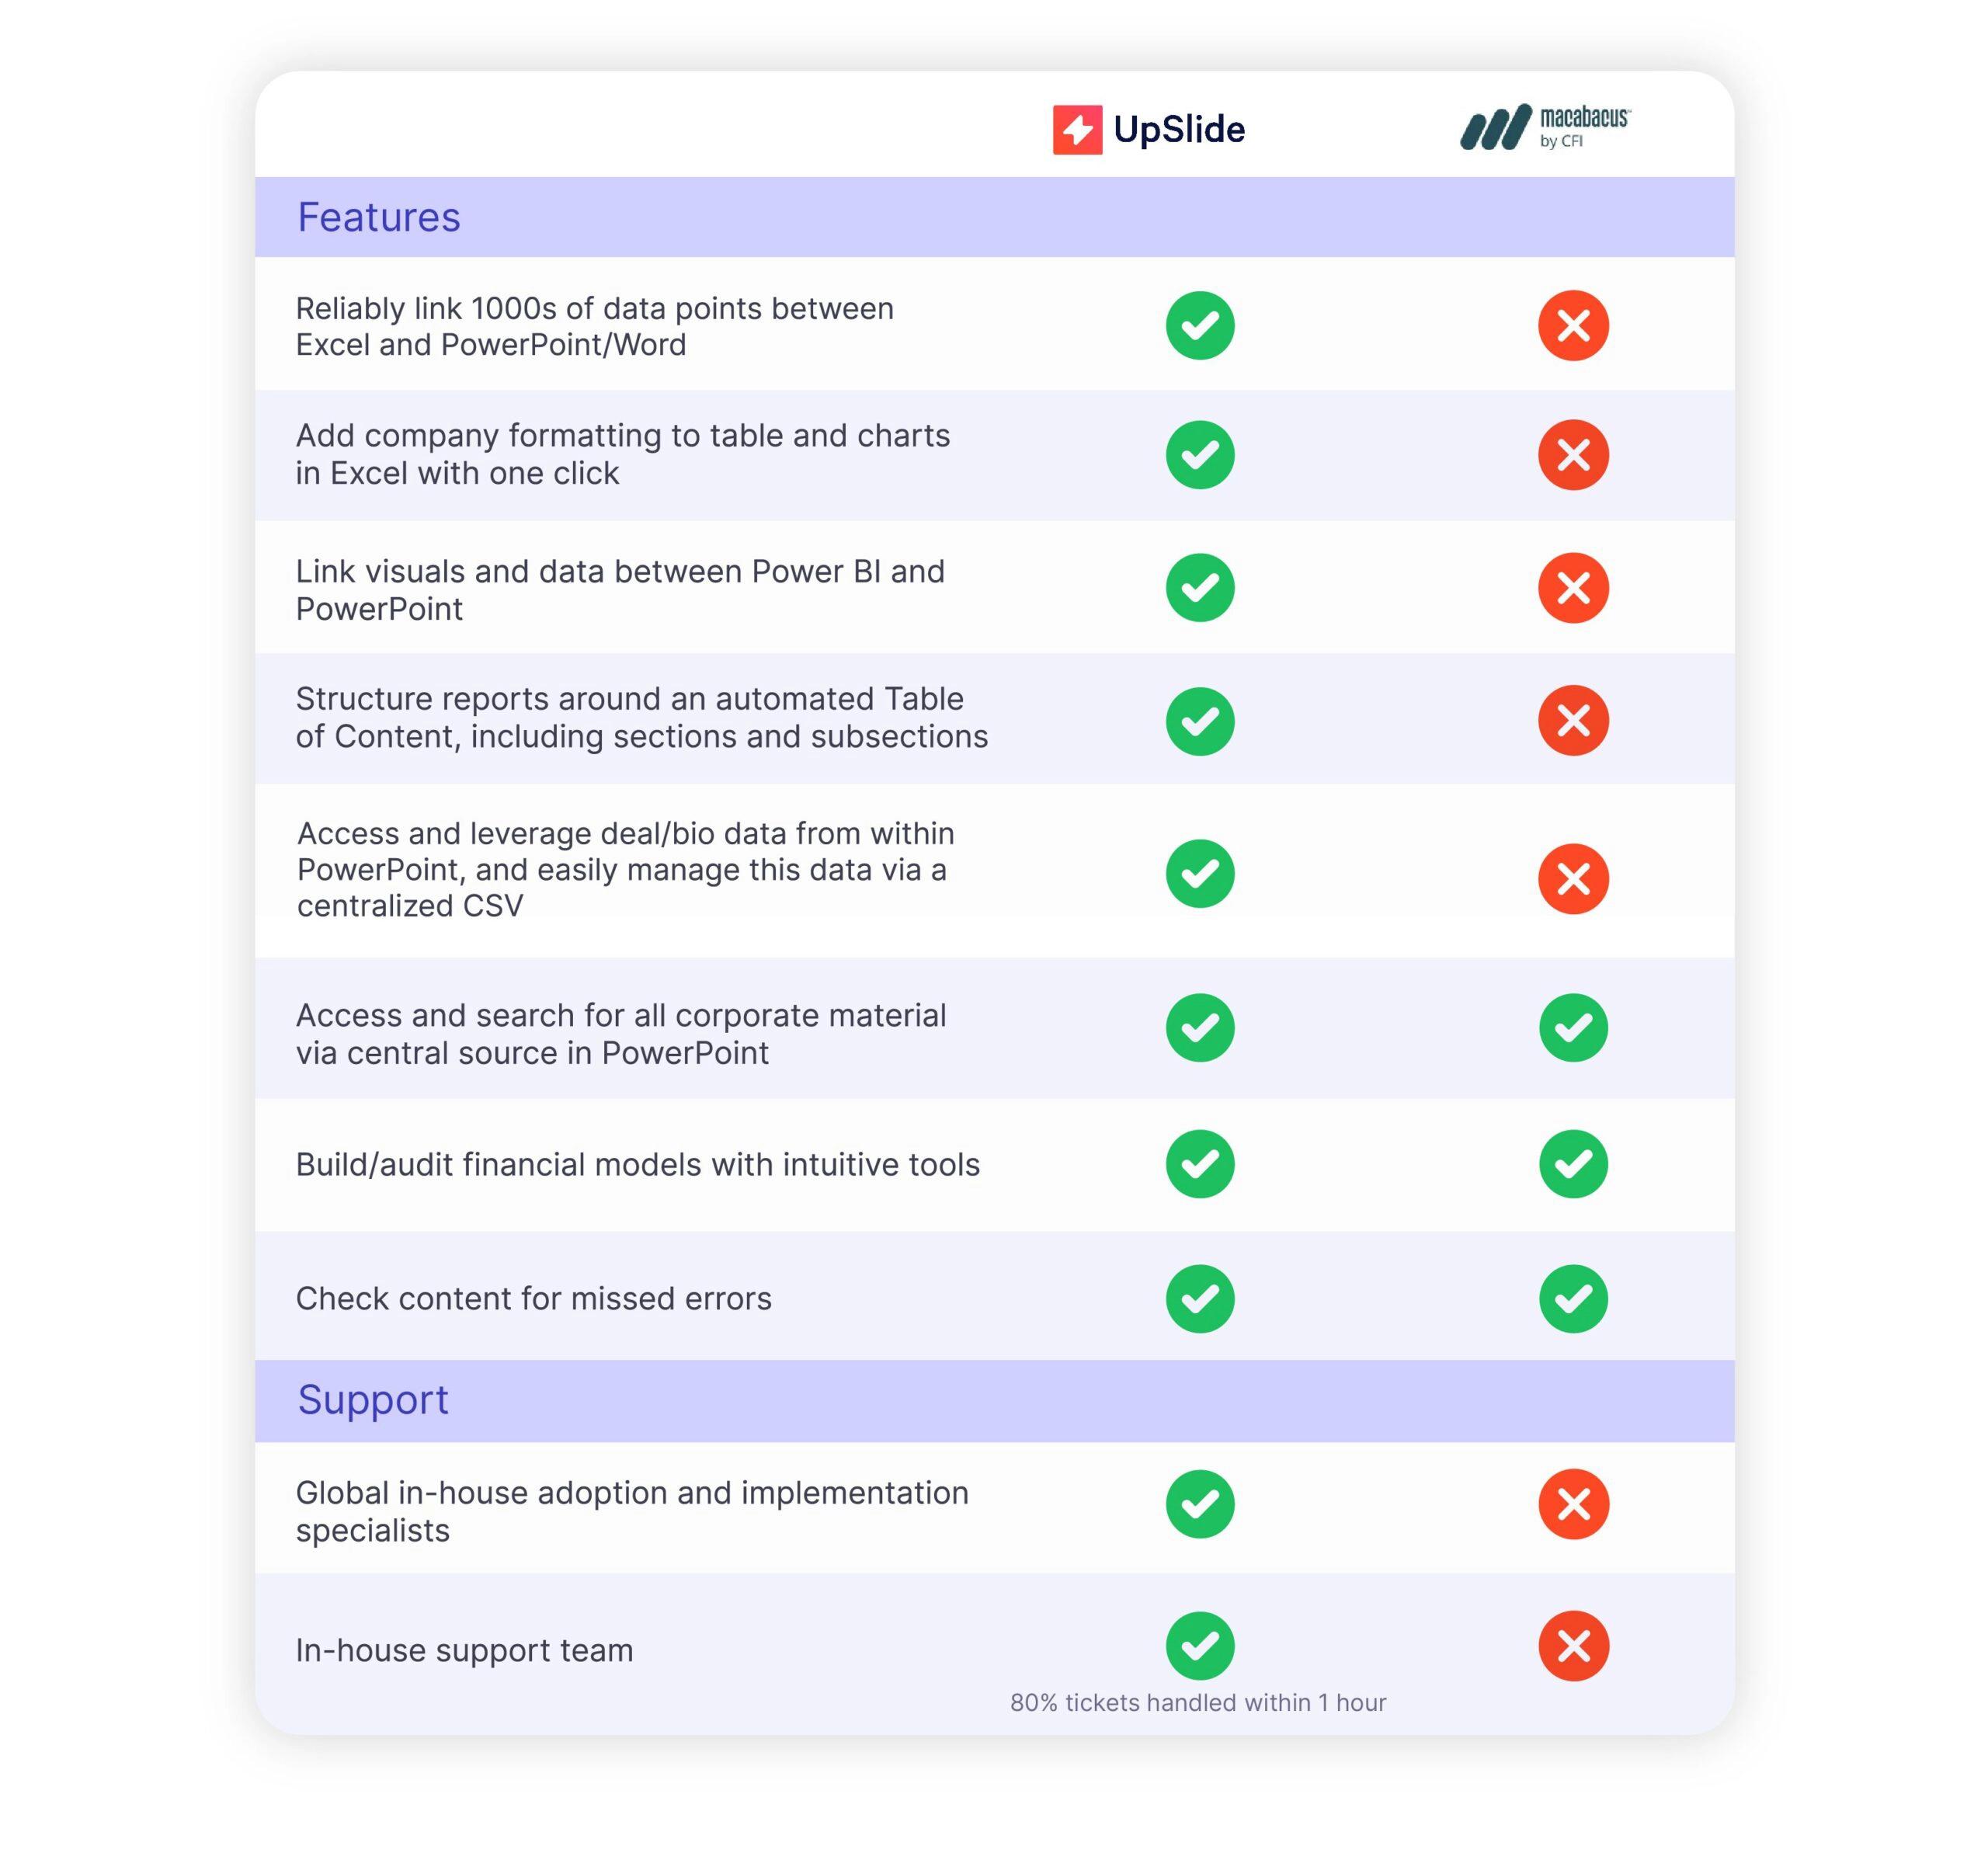 A comparison table between UpSlide and Macabacus, looking at differences in features, support and expertise.